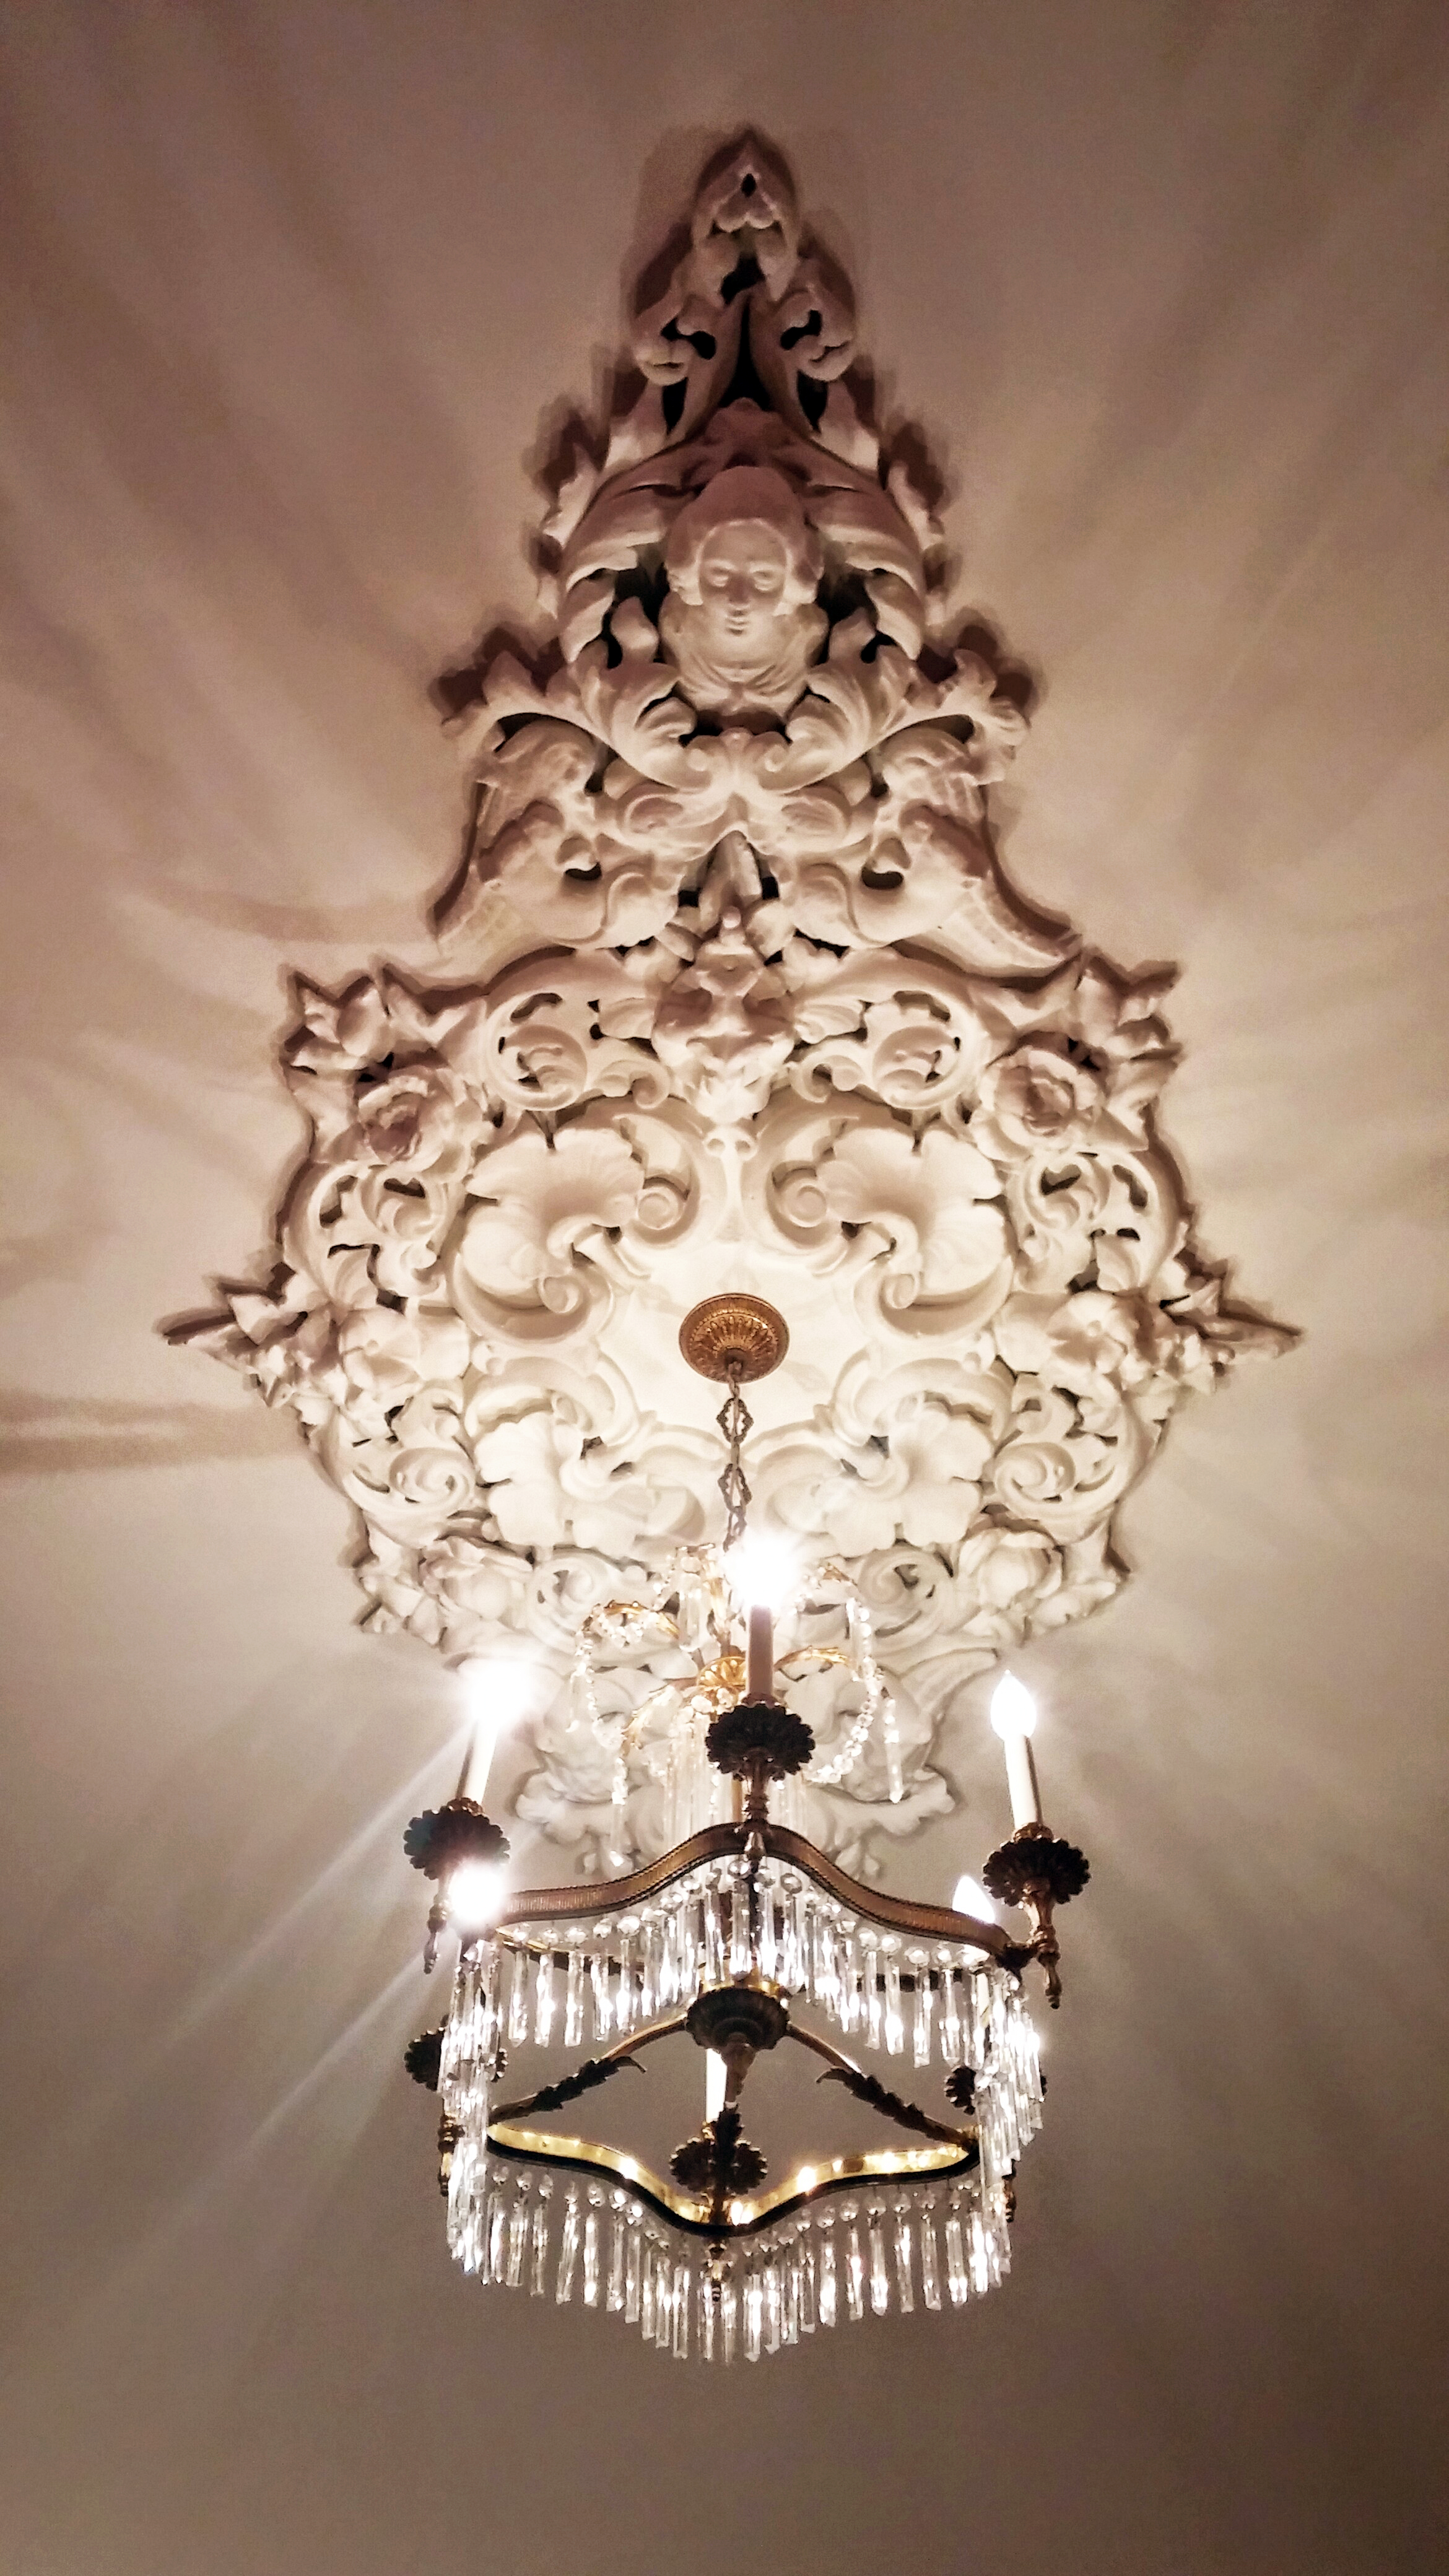  Chandelier and ceiling detail. 